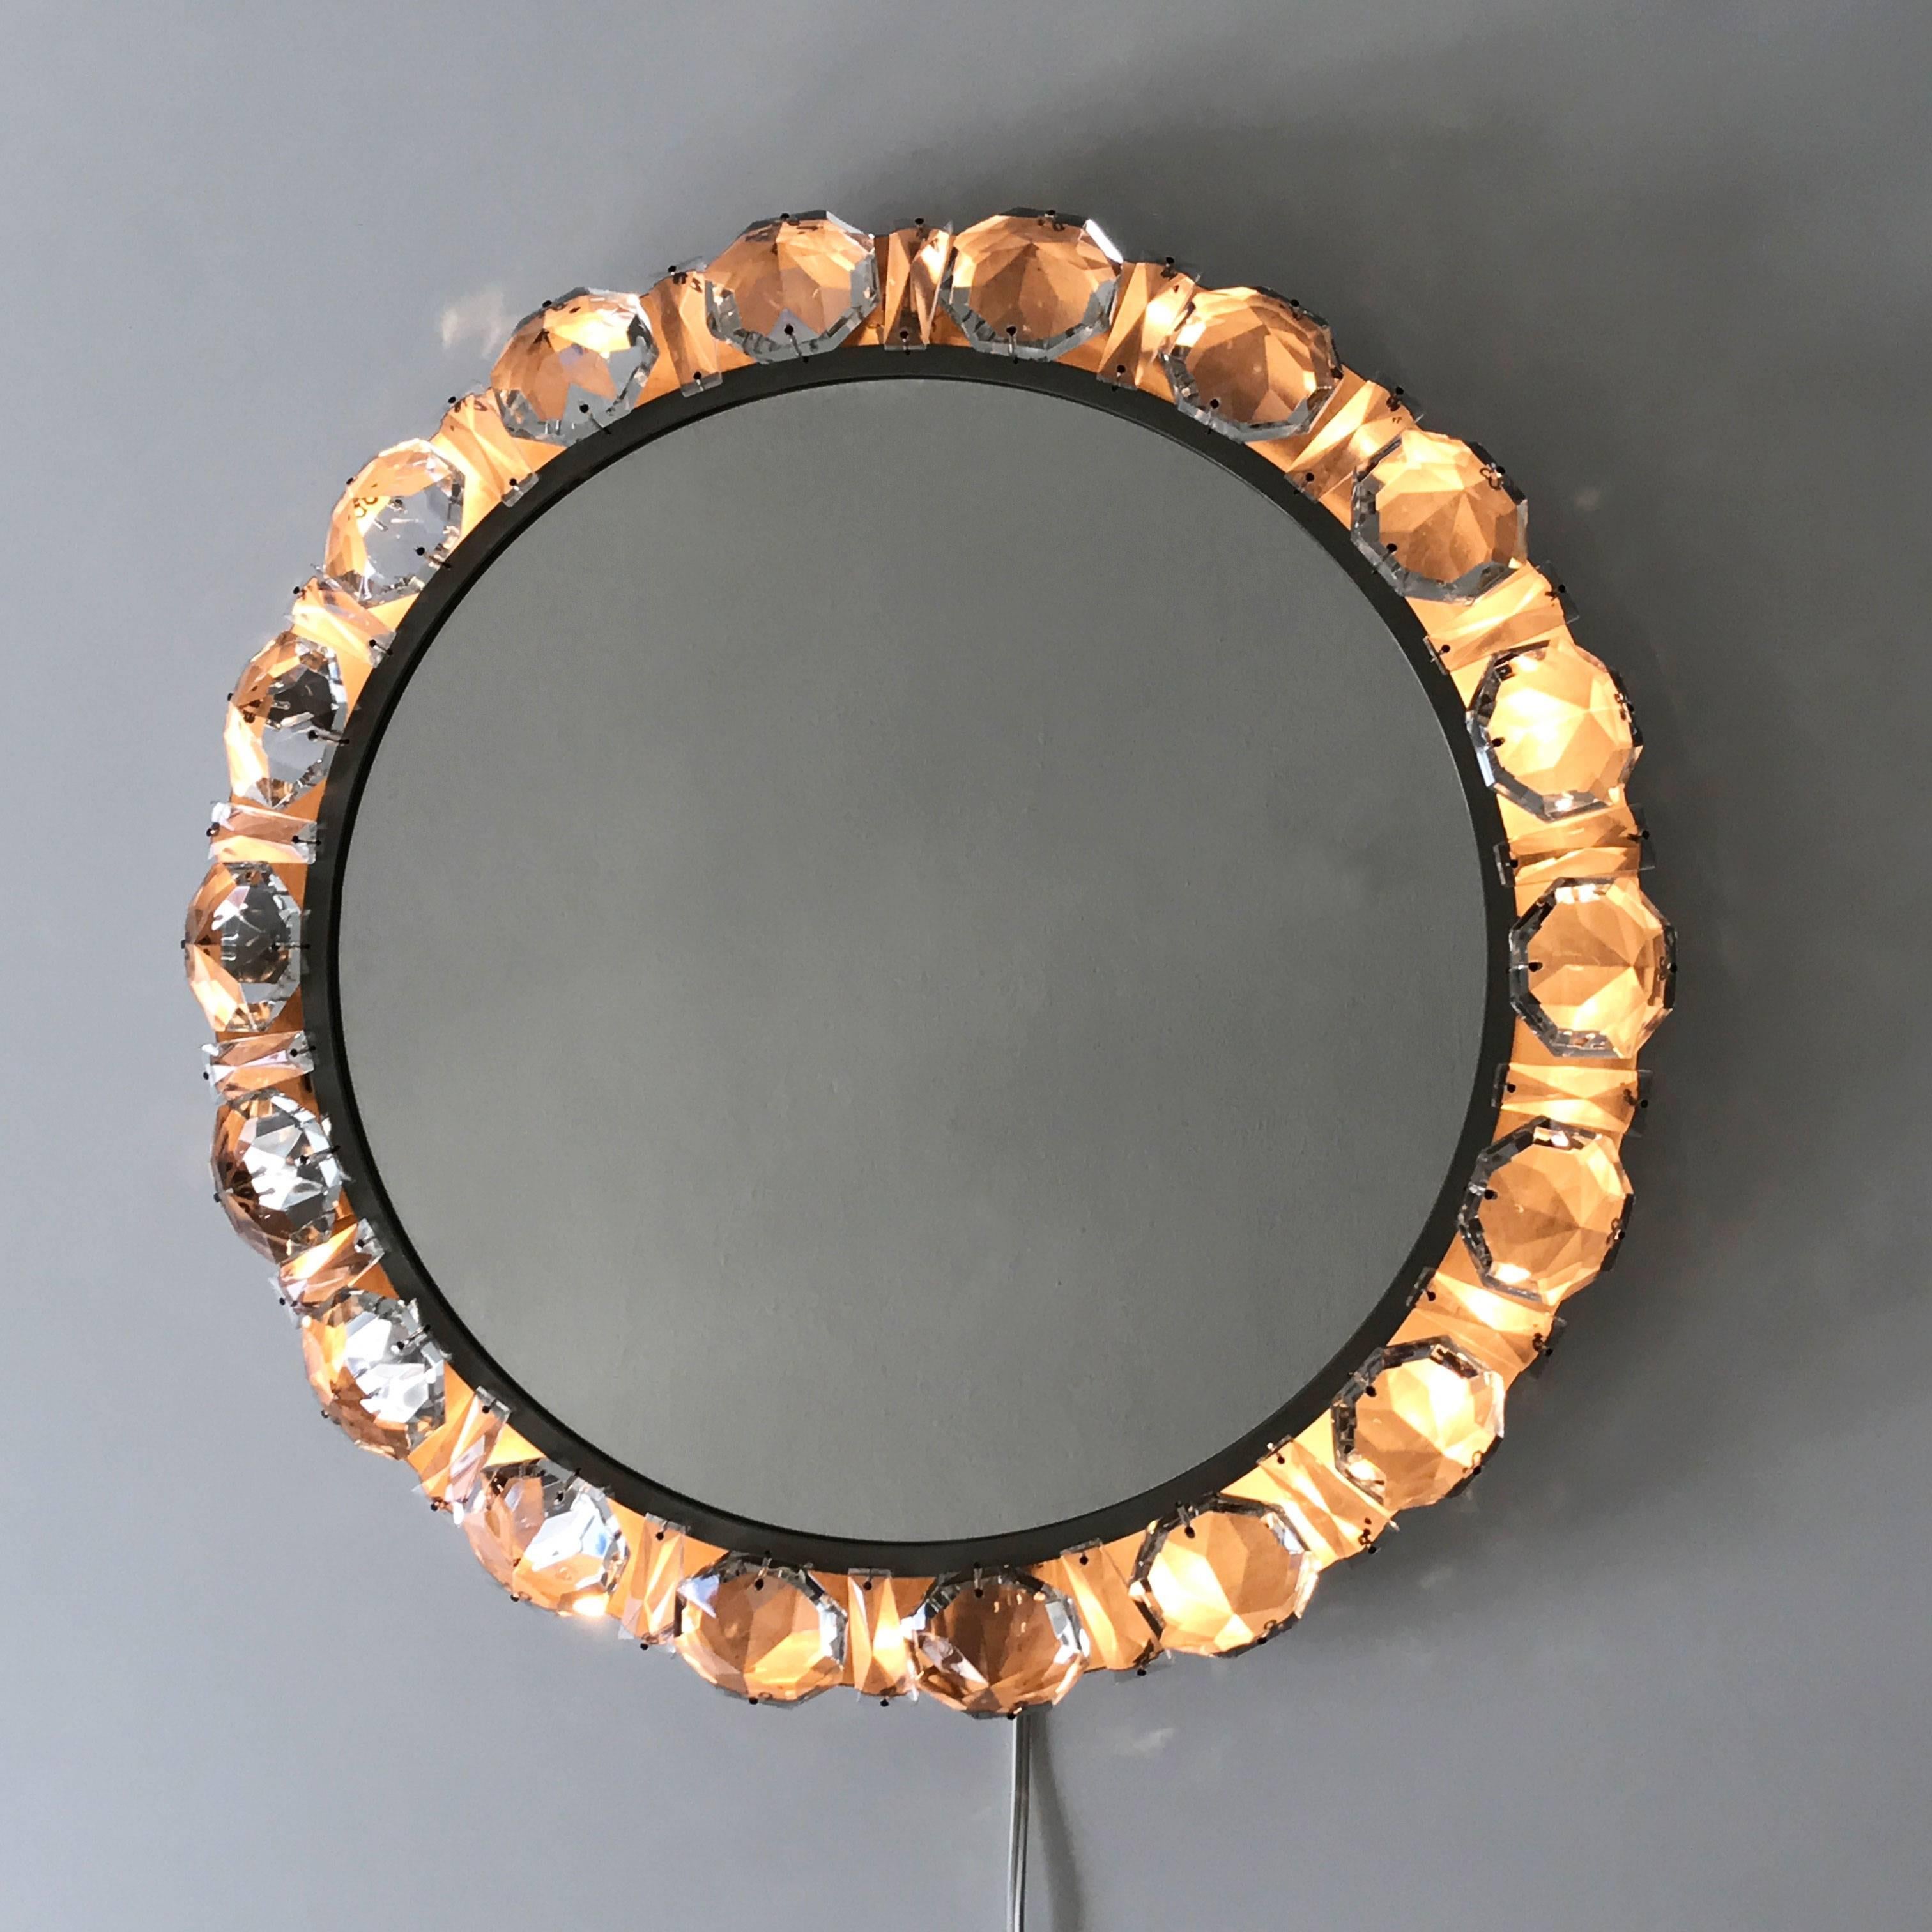 Elegant Mid Century Modern Circular Backlit Wall Mirror by Palwa Germany 1960s In Good Condition For Sale In Munich, DE